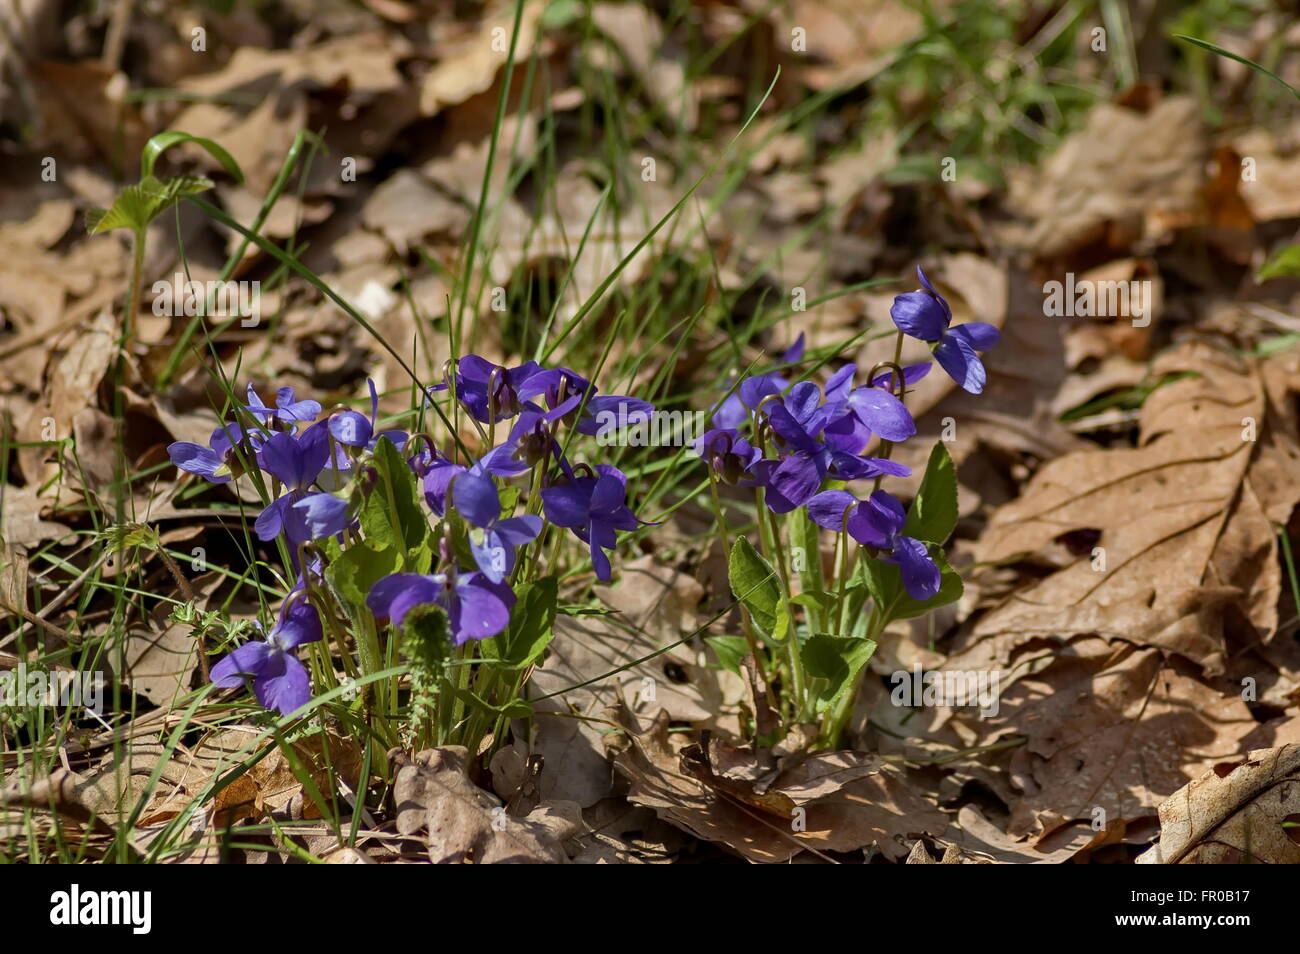 Heartsease or Viola tricolor blooming in the glade, Murgash mountain, Bulgaria. Stock Photo